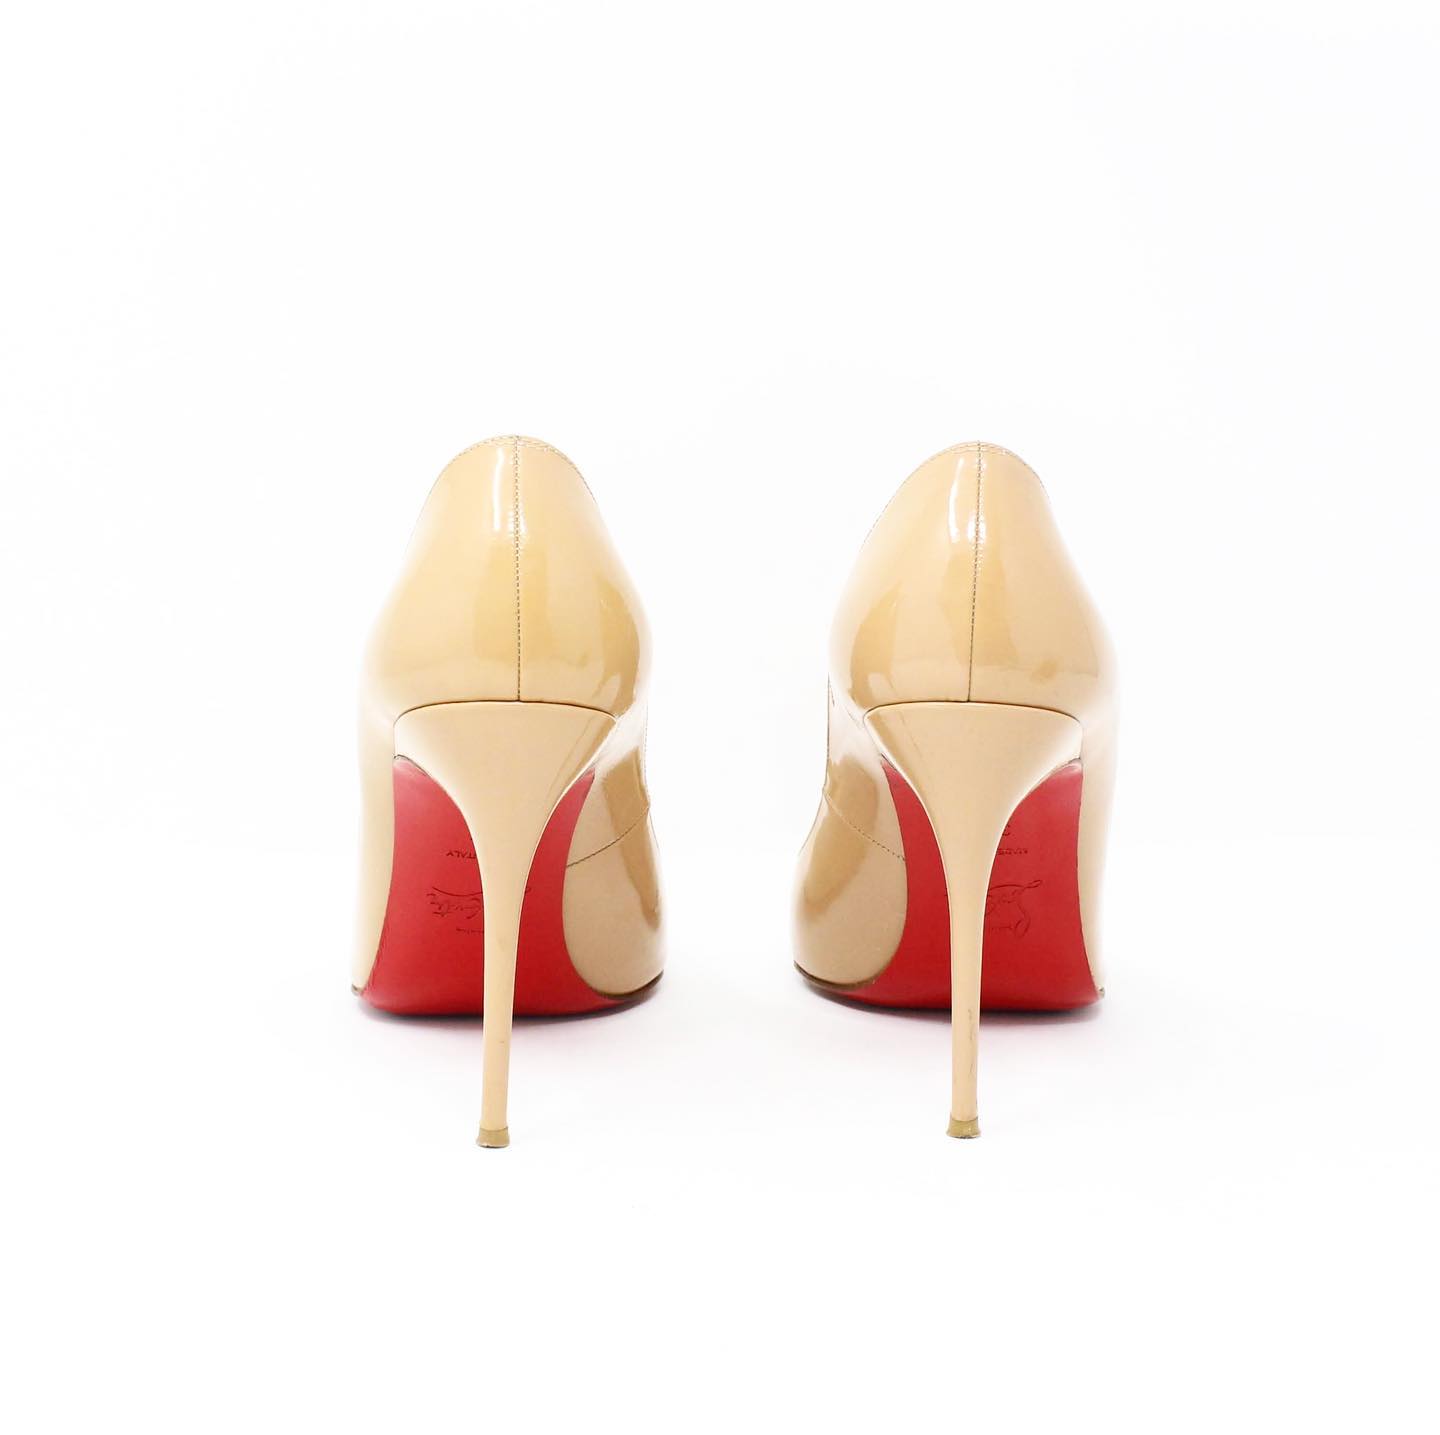 LOUBOUTIN Patent Leather Heels (US 9.5 / EU #27474 – ALL BLISS